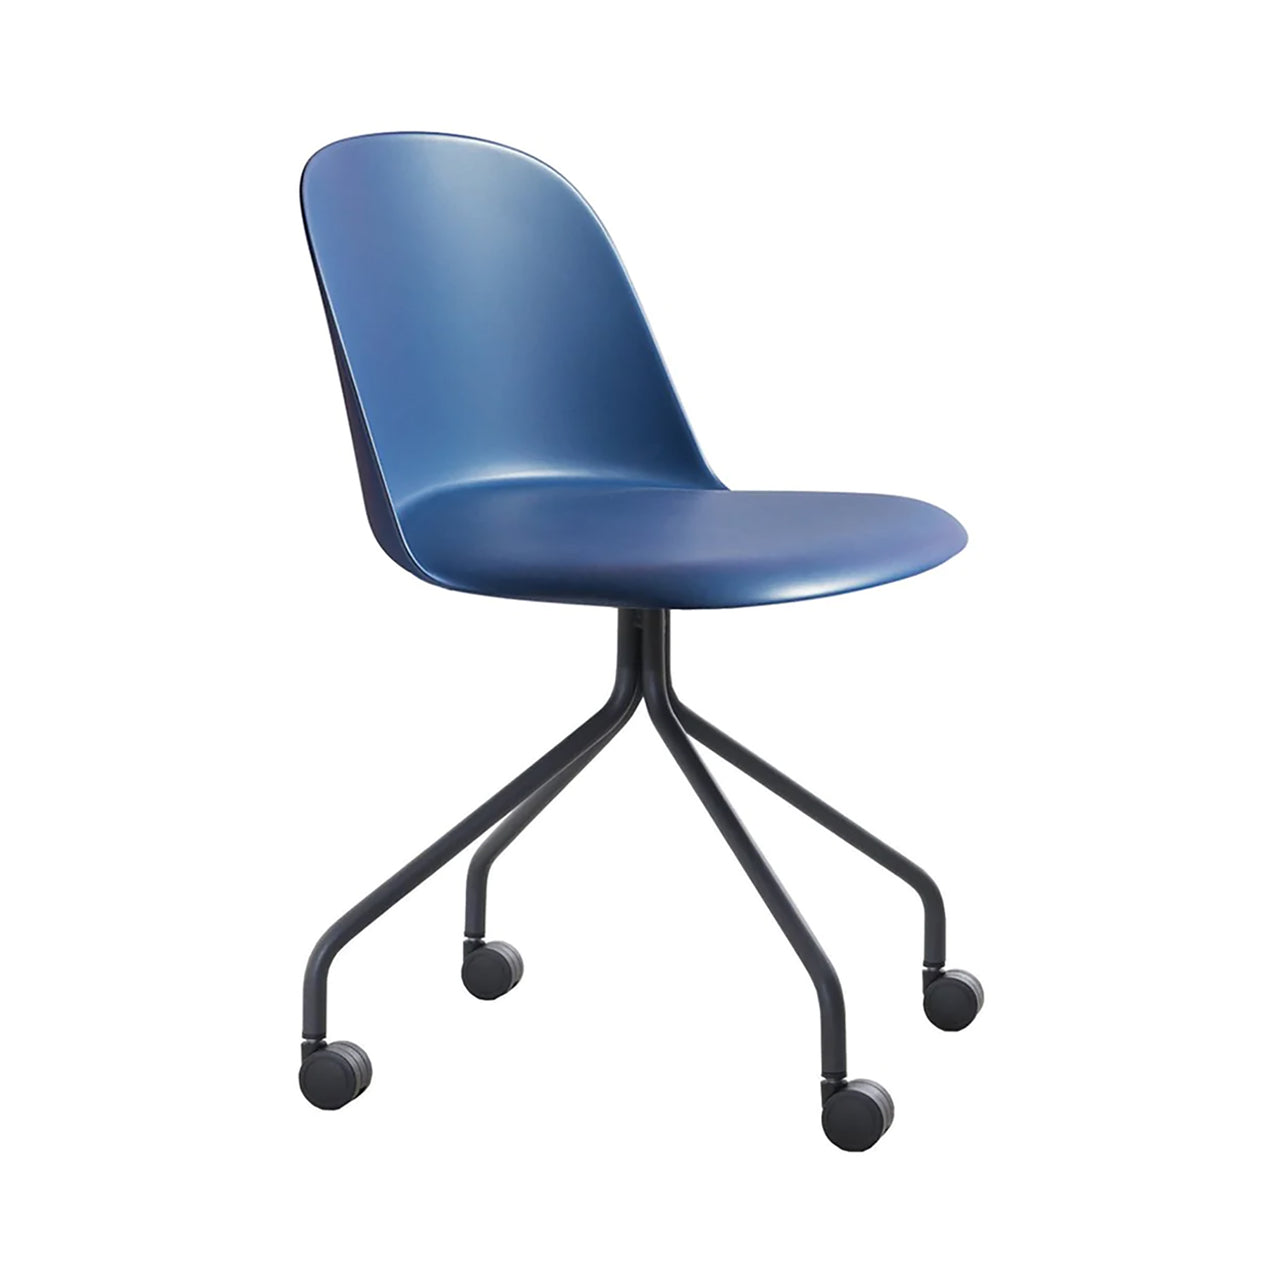 Mariolina Side Chair: Casters + Lacquered Anthracite + Intense Blue